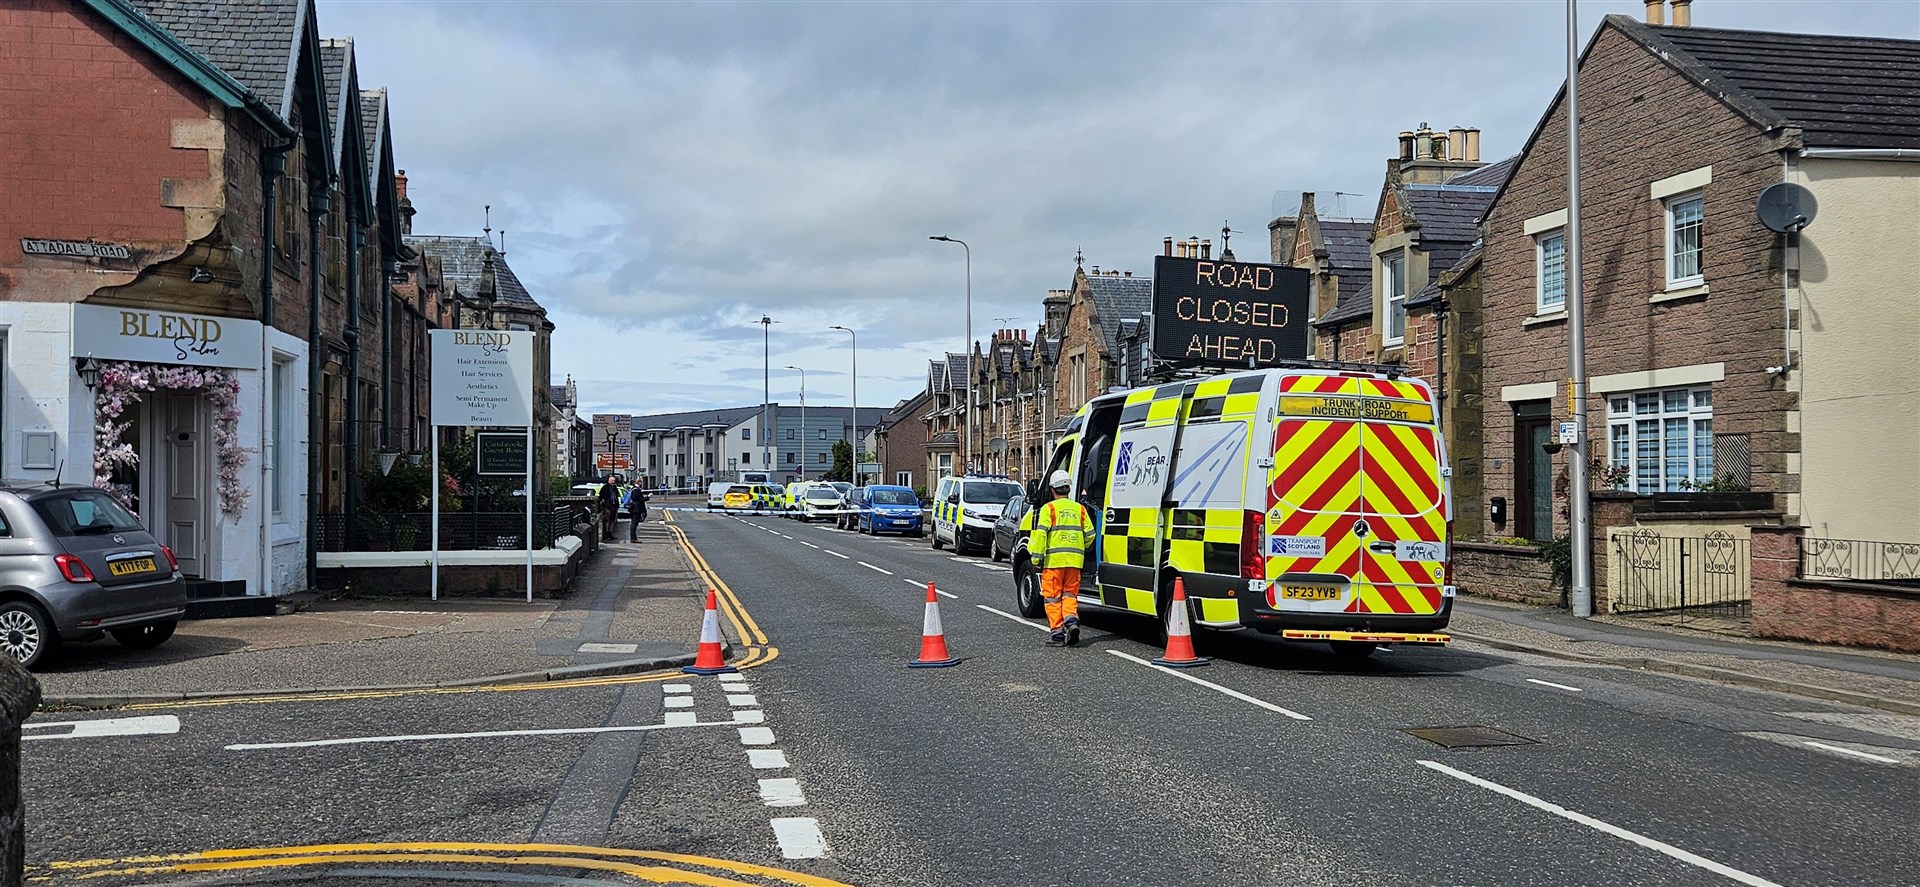 Bear Scotland, which maintains the A82, of which Kenneth Street is a part, had a vehicle on site warning motorists of the road closure.